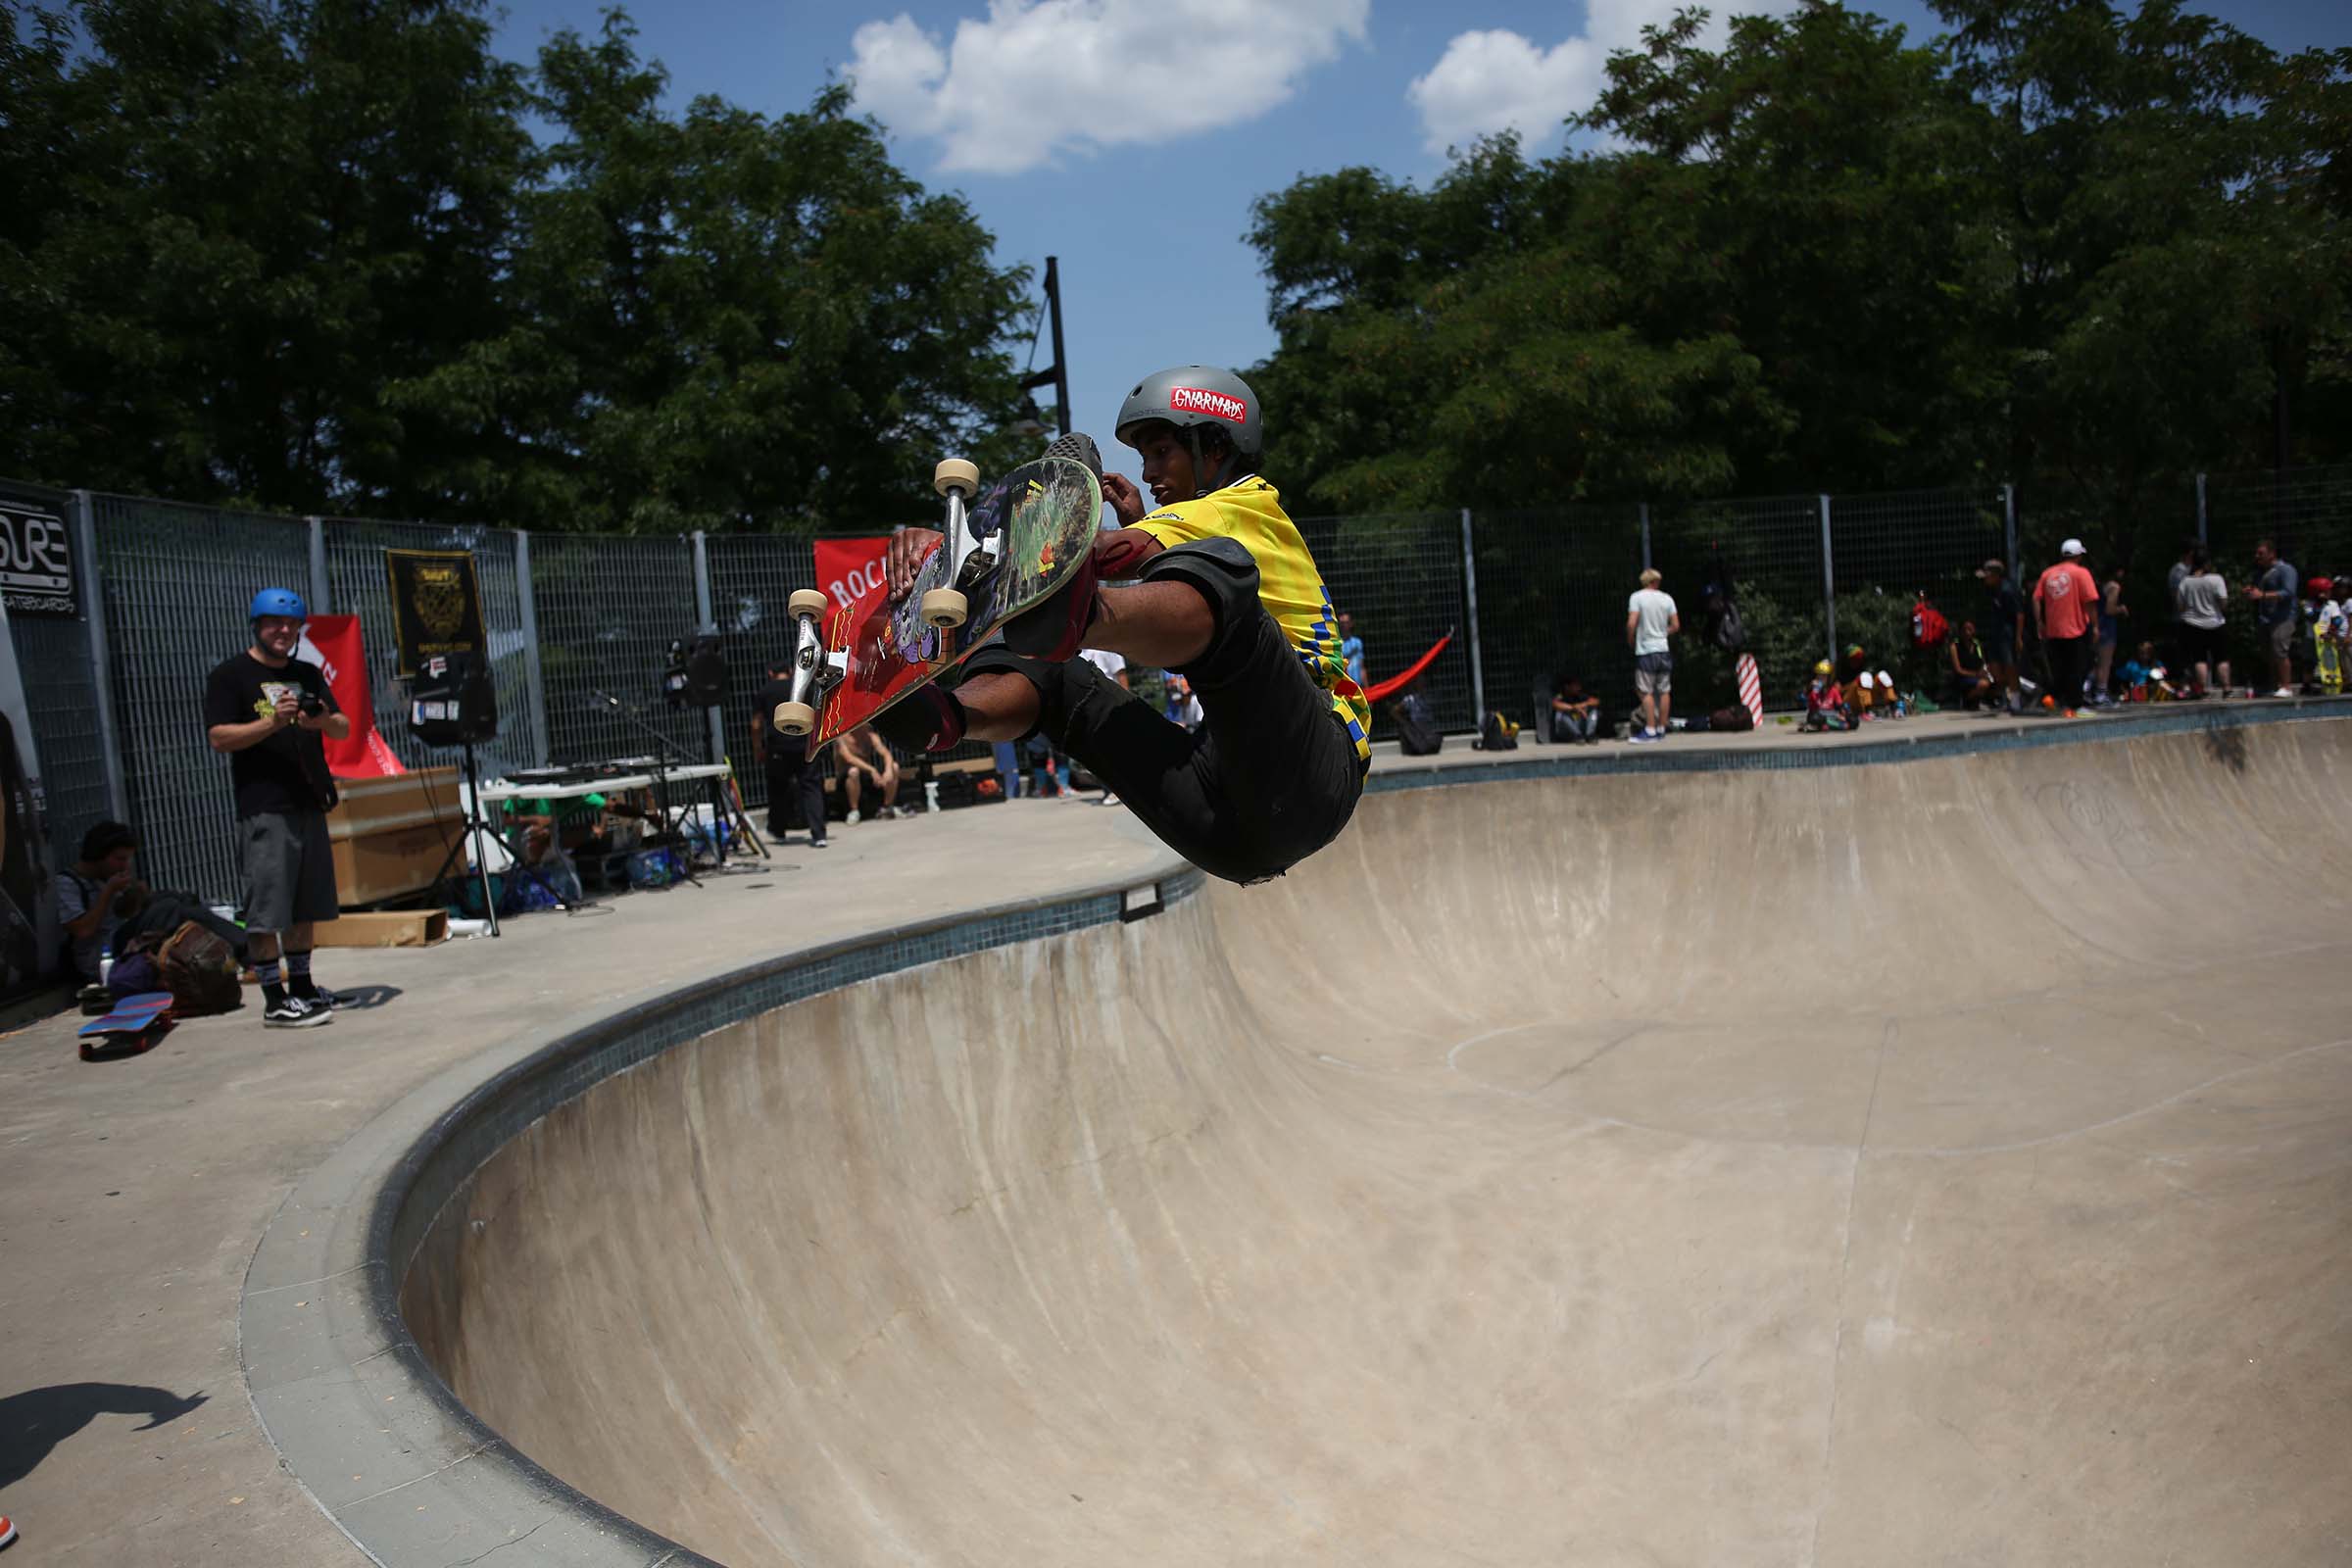 A skateboarder in yellow flies up after skating up the hill